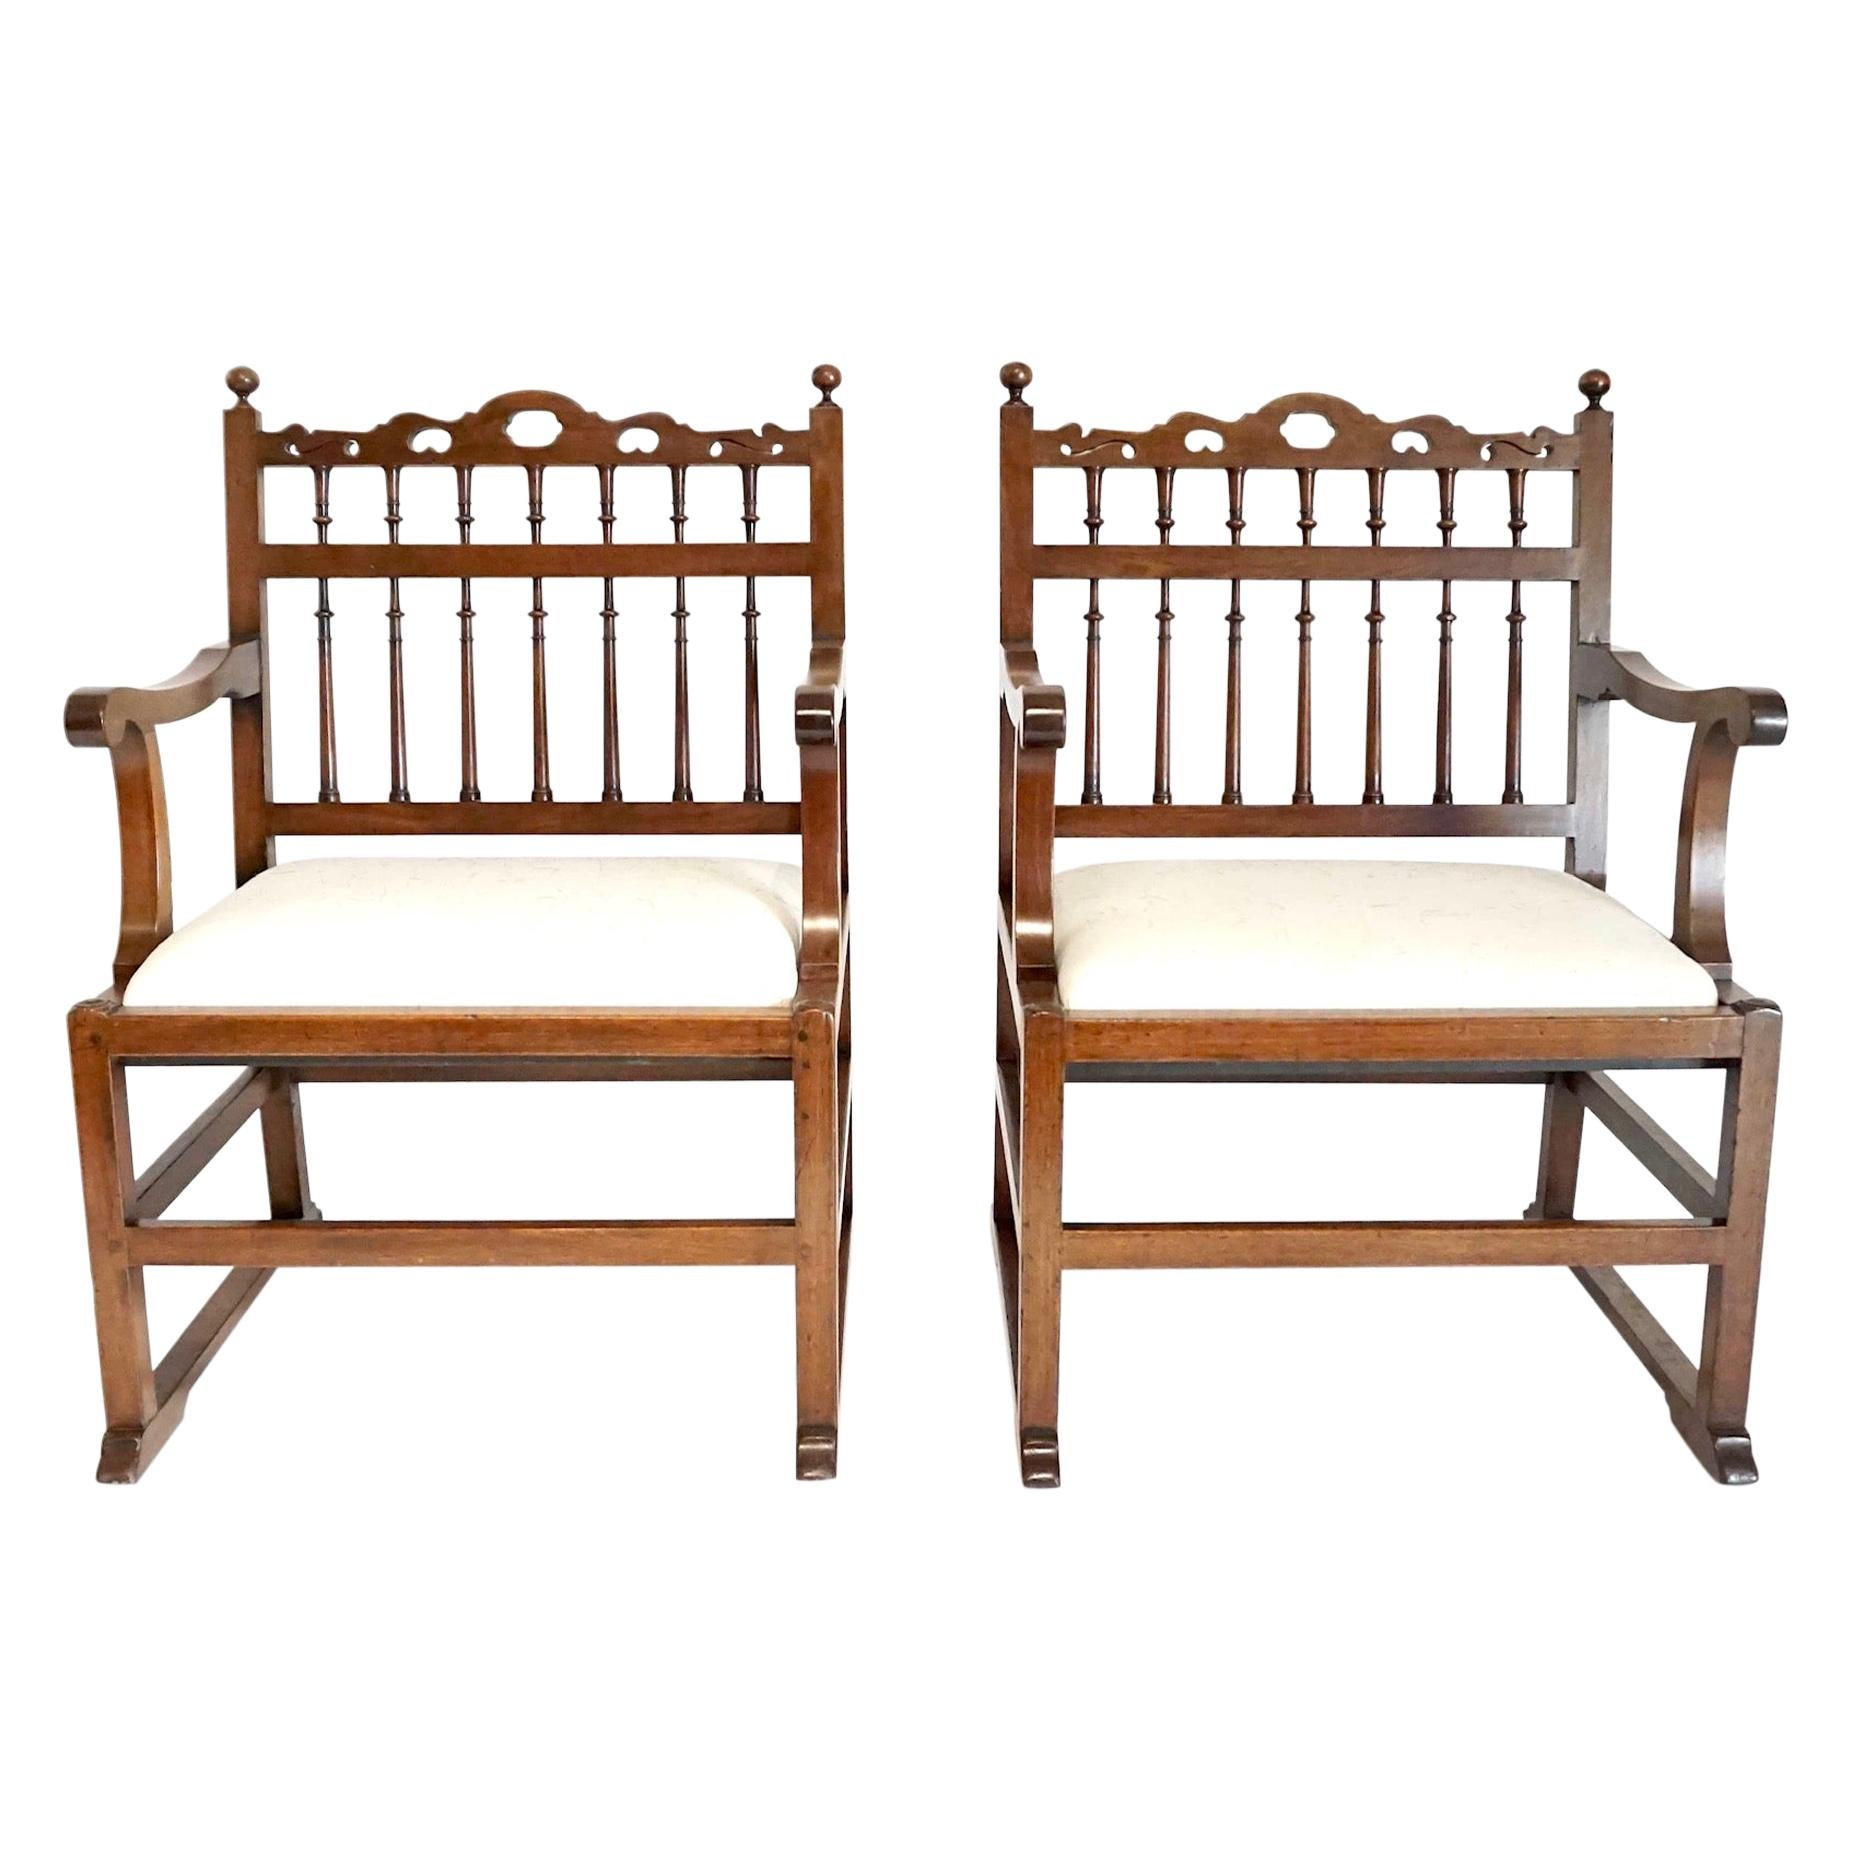 A Pair of Northern English Spindle-Back Arm Chairs, circa 1780